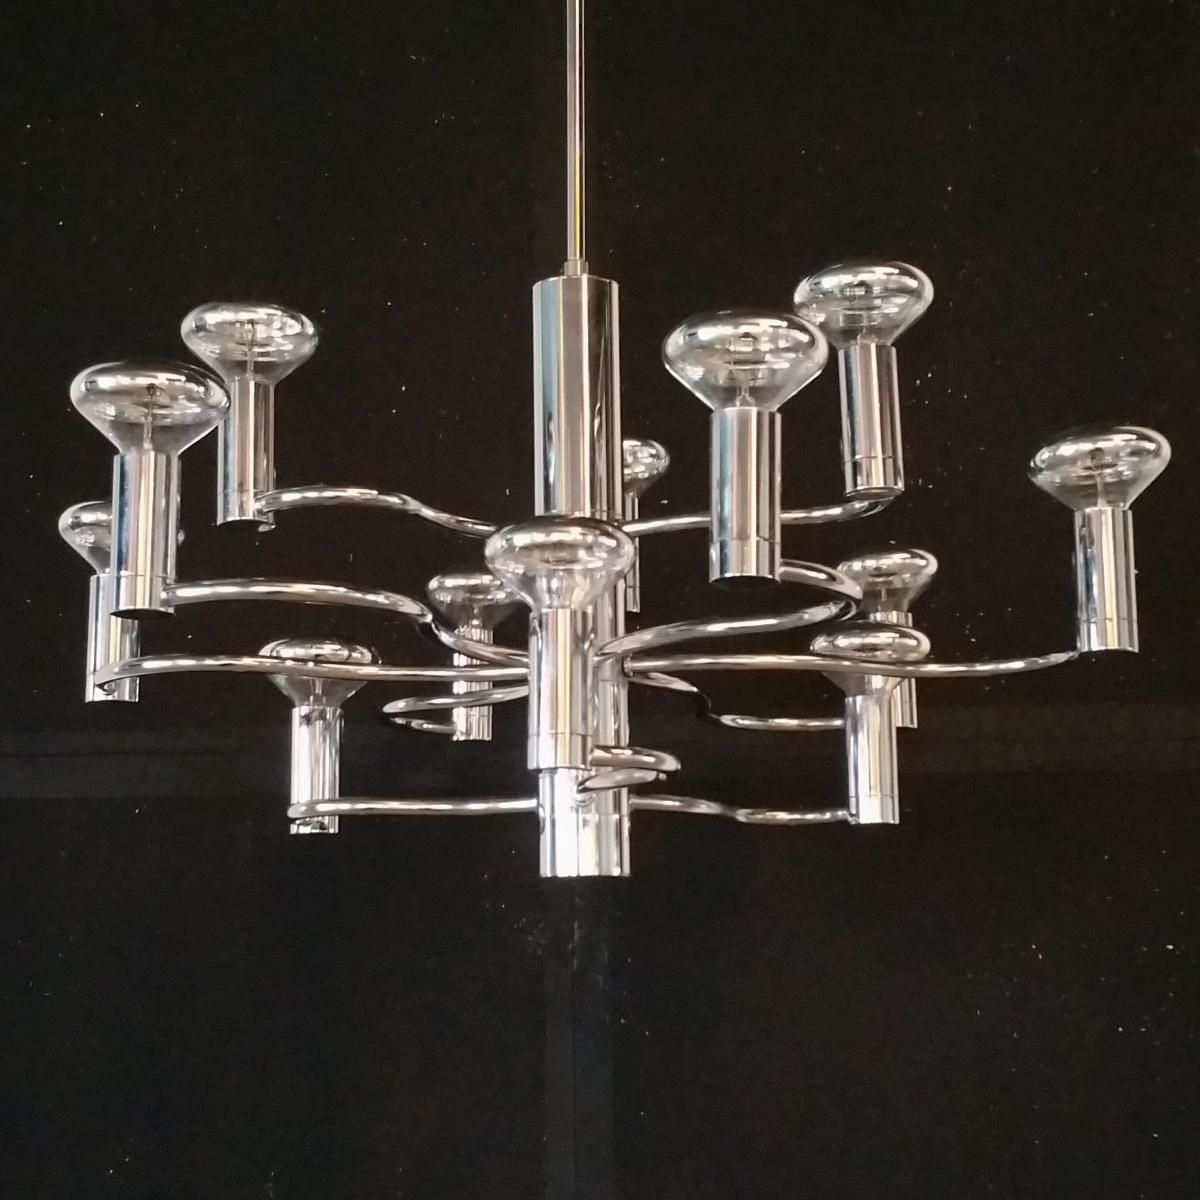 Popular Massive Chandelier Intended For Vintage 12 Light Chrome Chandelier From Massive, 1970s For Sale At (View 17 of 20)